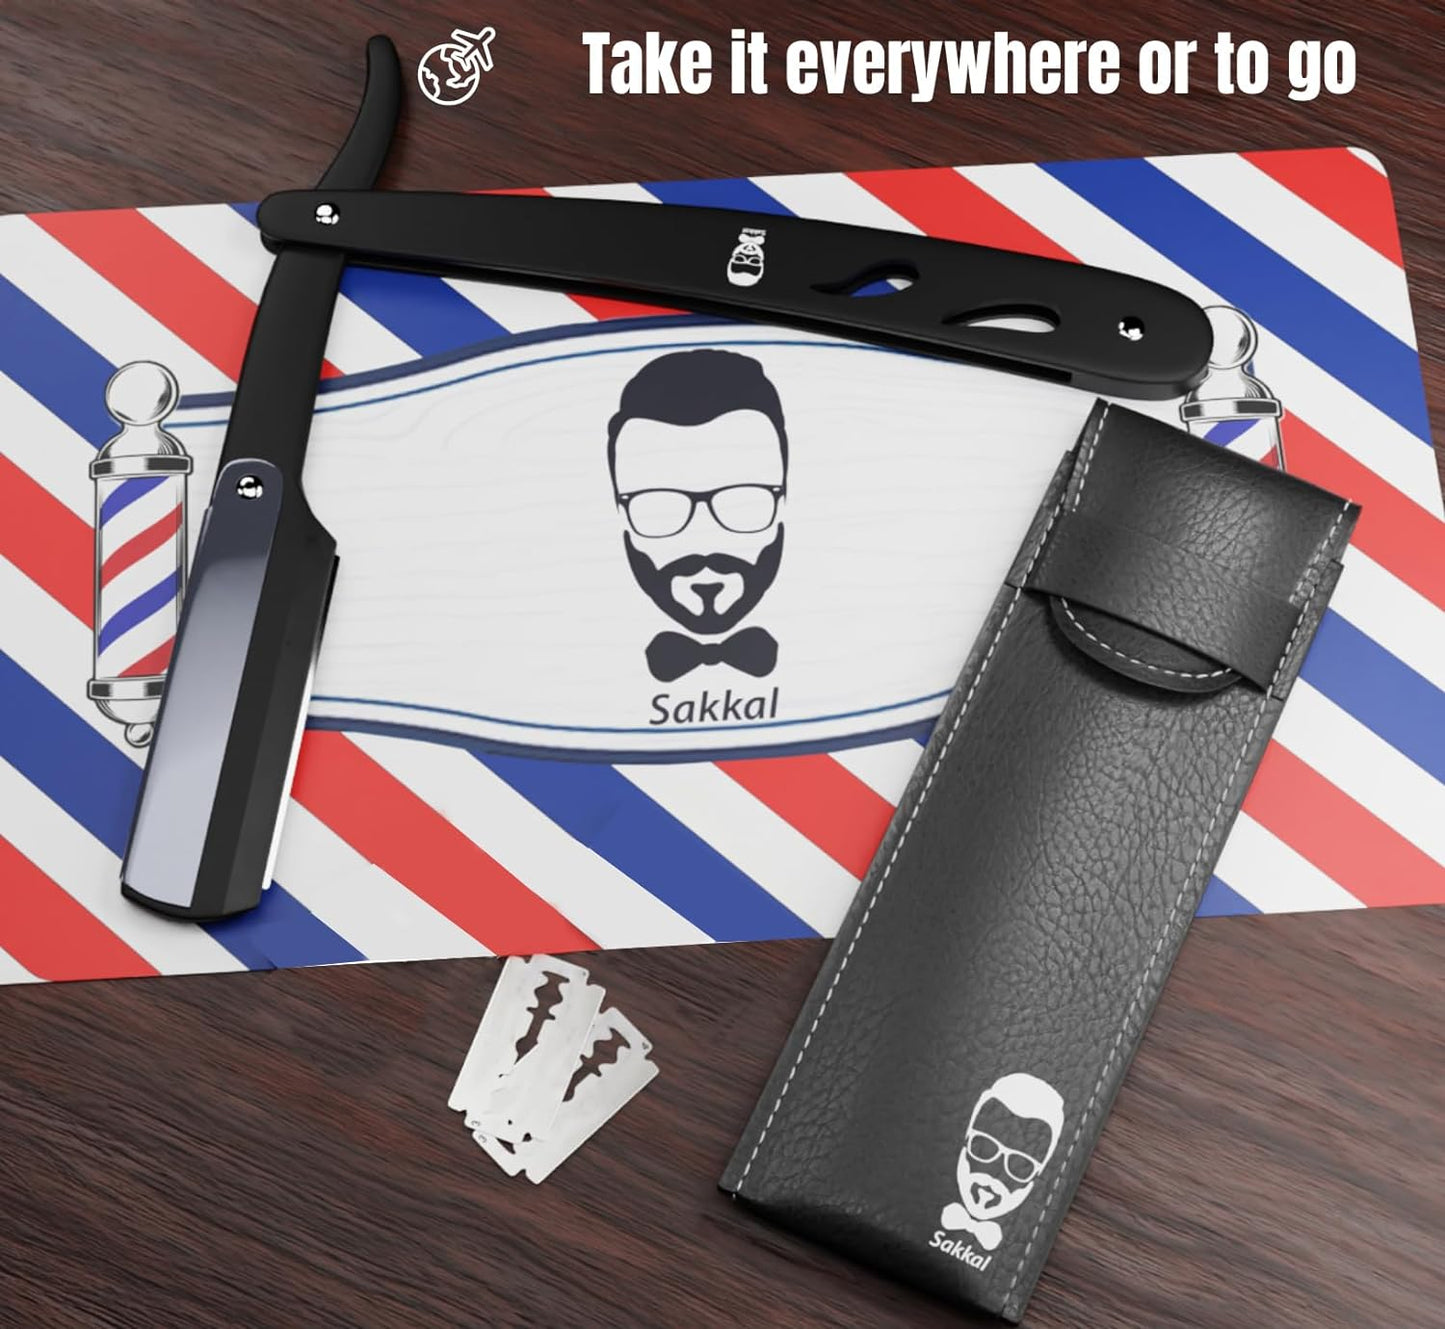 KD Straight Edge Barber Blade with Leather Travel Case